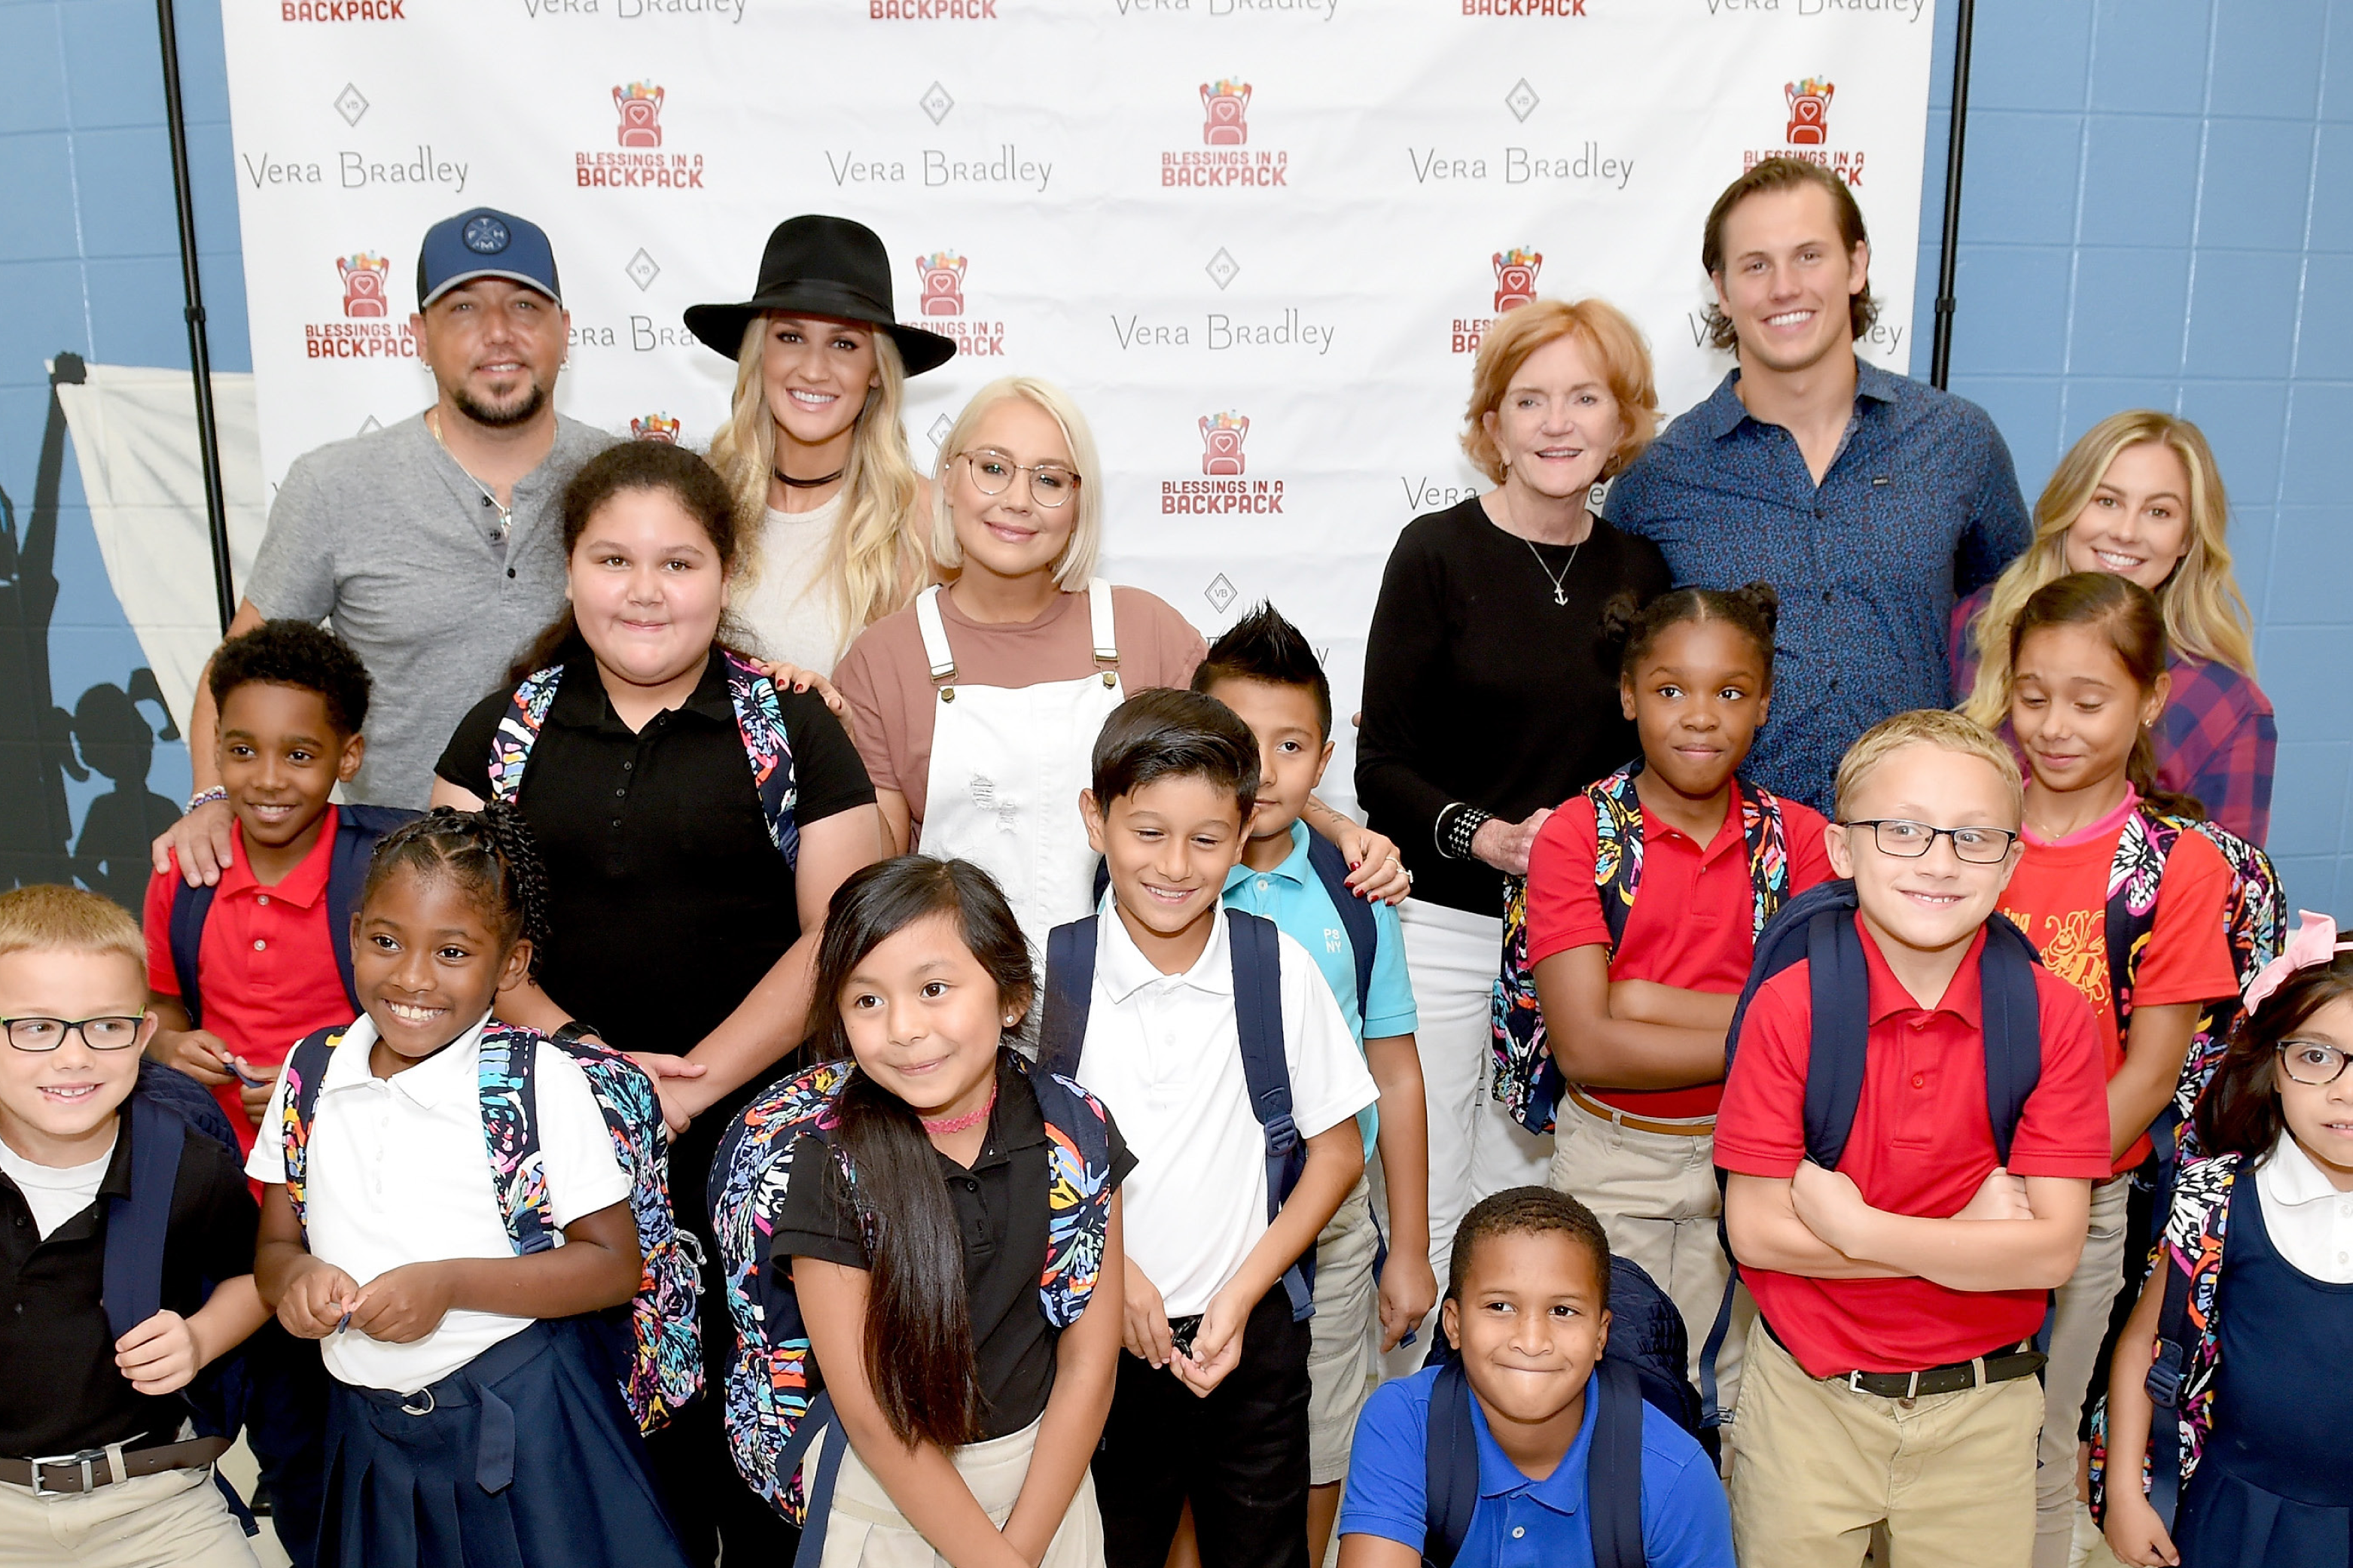 Jason Aldean & Wife Brittany Host Vera Bradley x Blessings in a Backpack Elementary School Charity Event